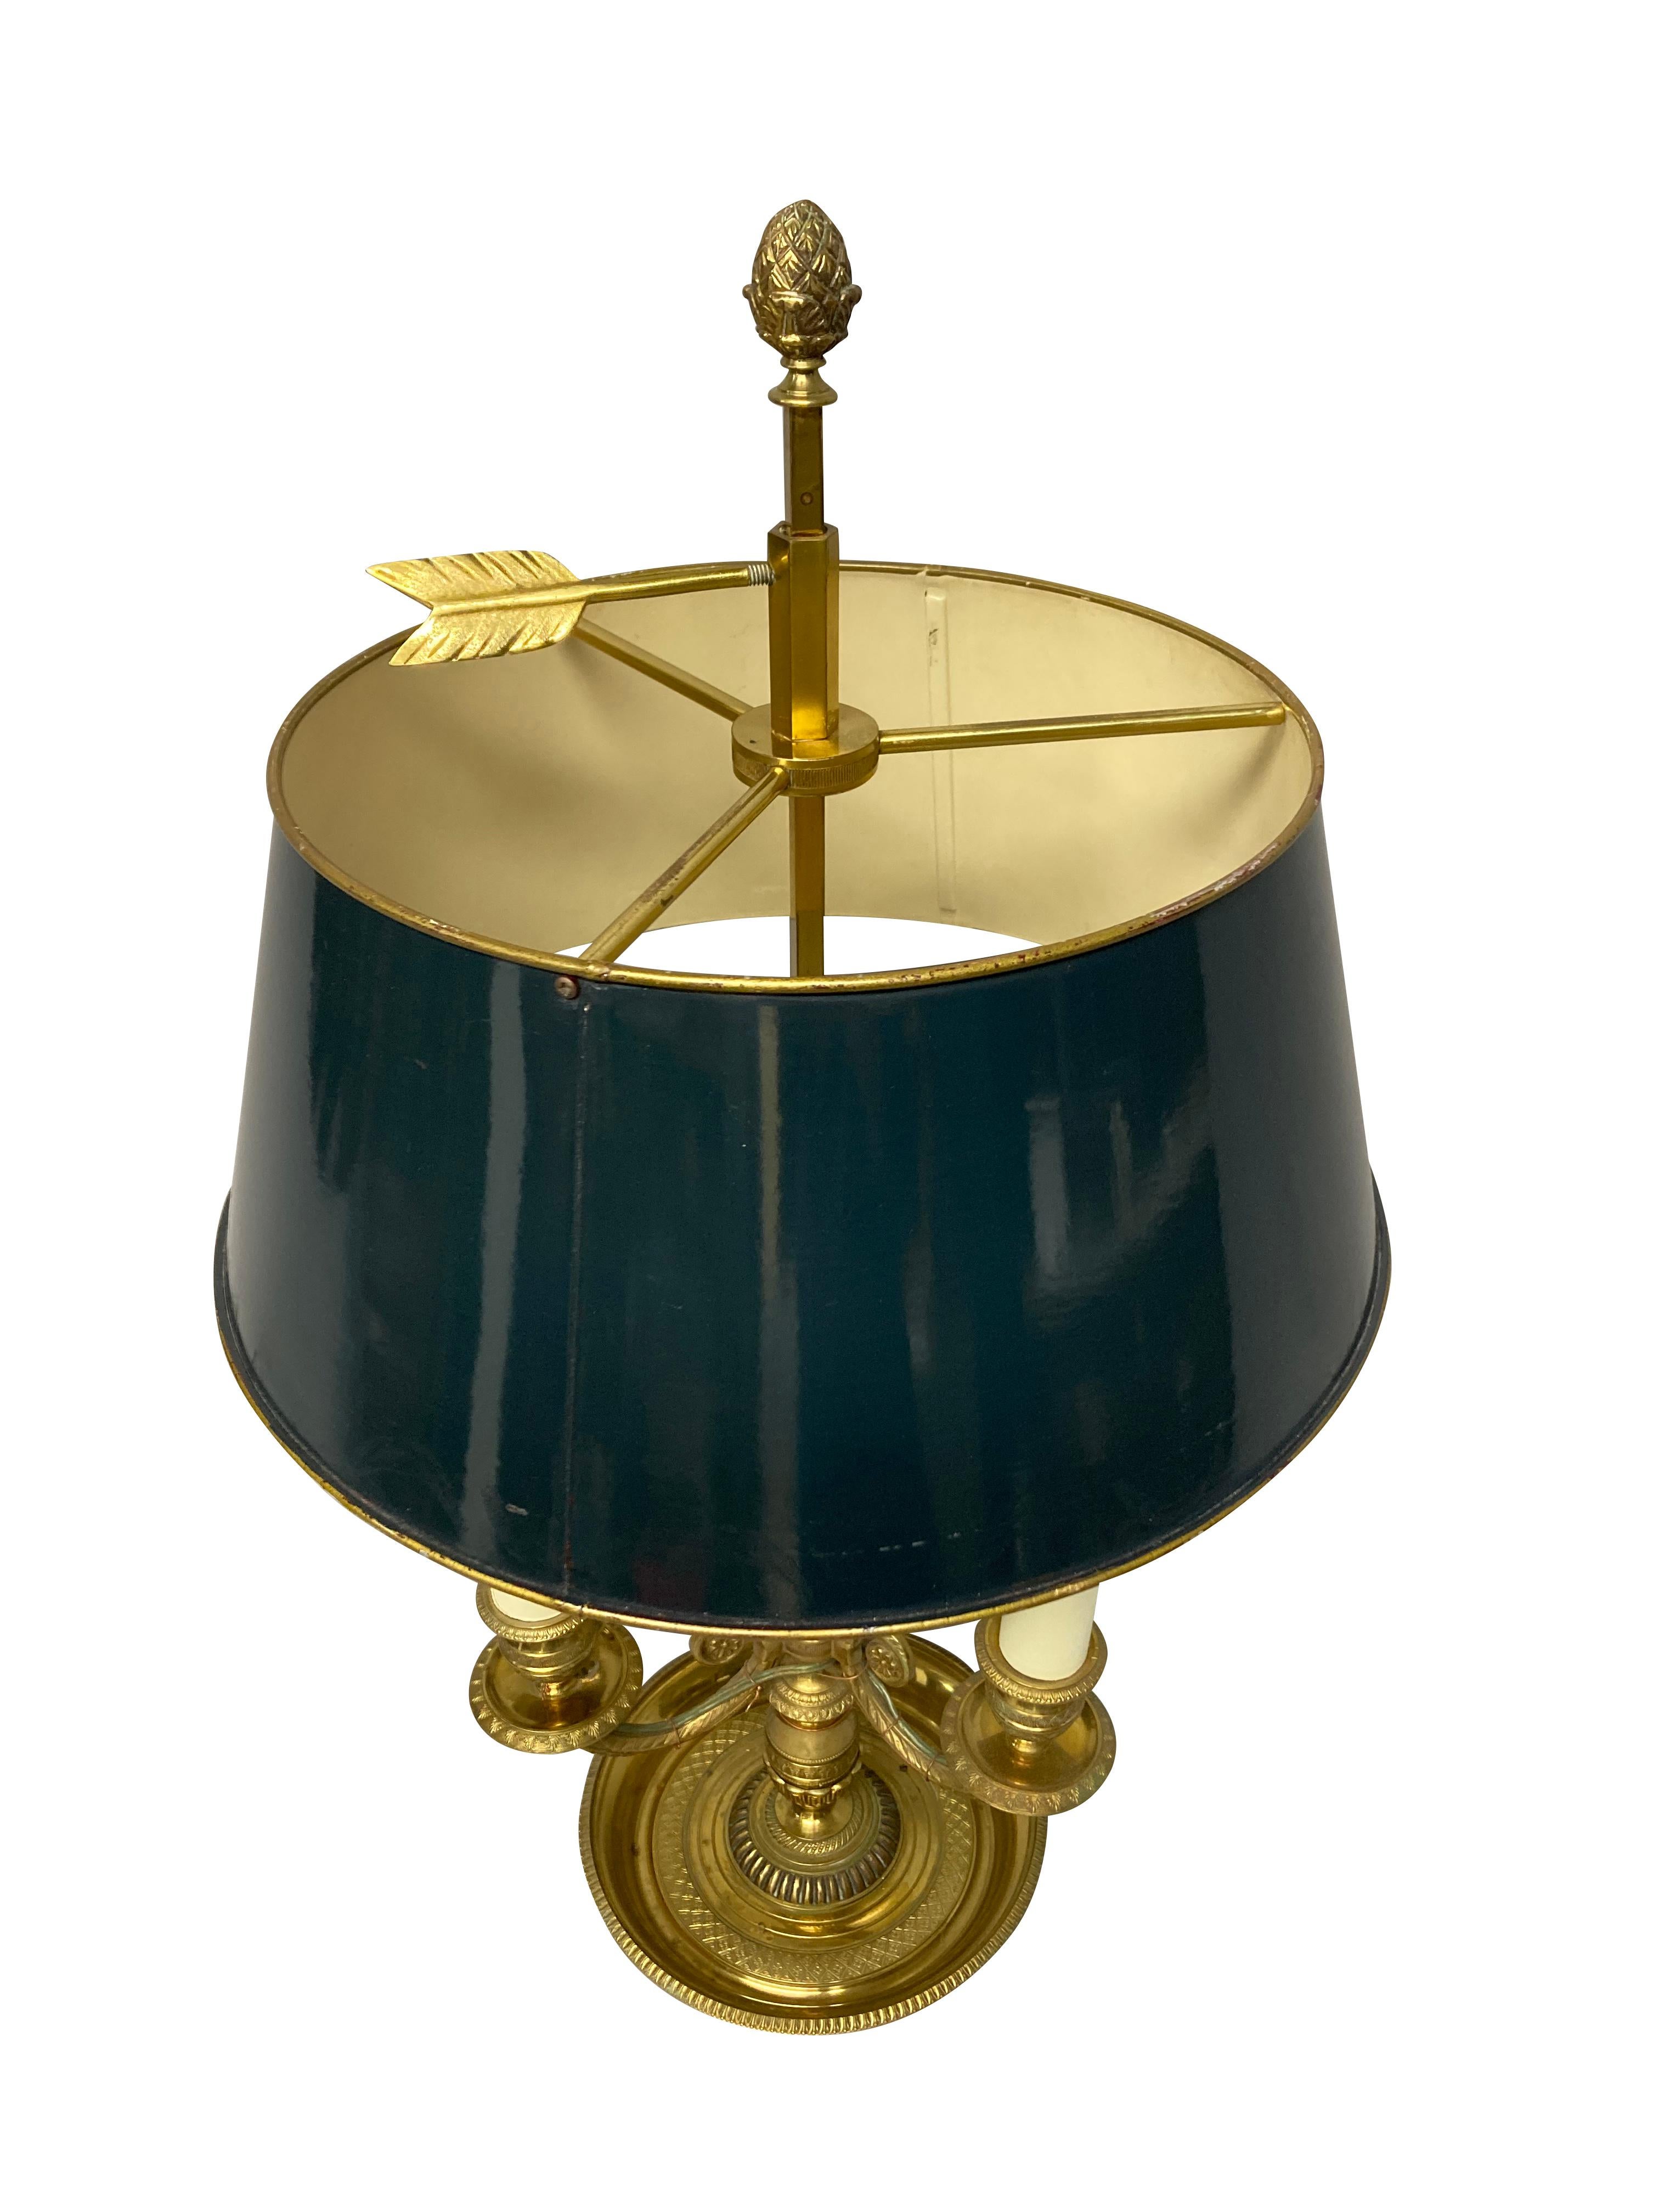 A French gilt brass bouillotte lamp of three branches and an adjustable blue painted tole shade. The detailing and the metal work is very fine, with acanthus, Greek key and acorn decoration. Originally for candles, now electrified.